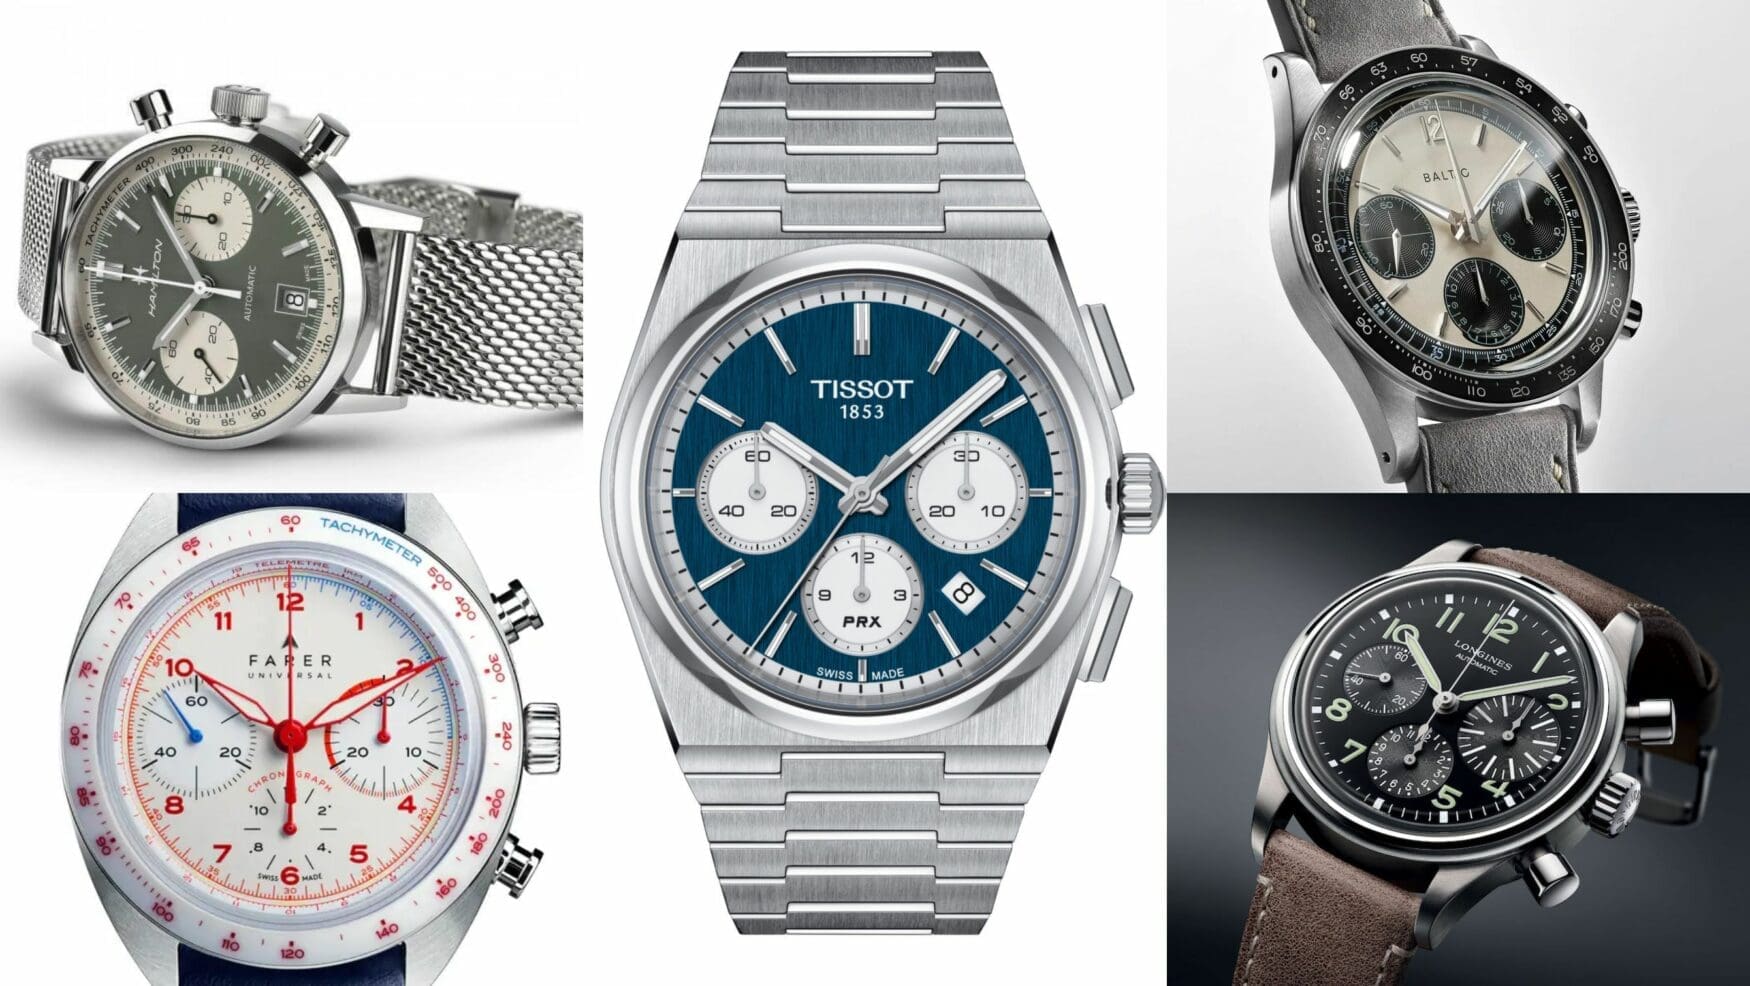 The 5 best affordable mechanical chronographs under $3,000